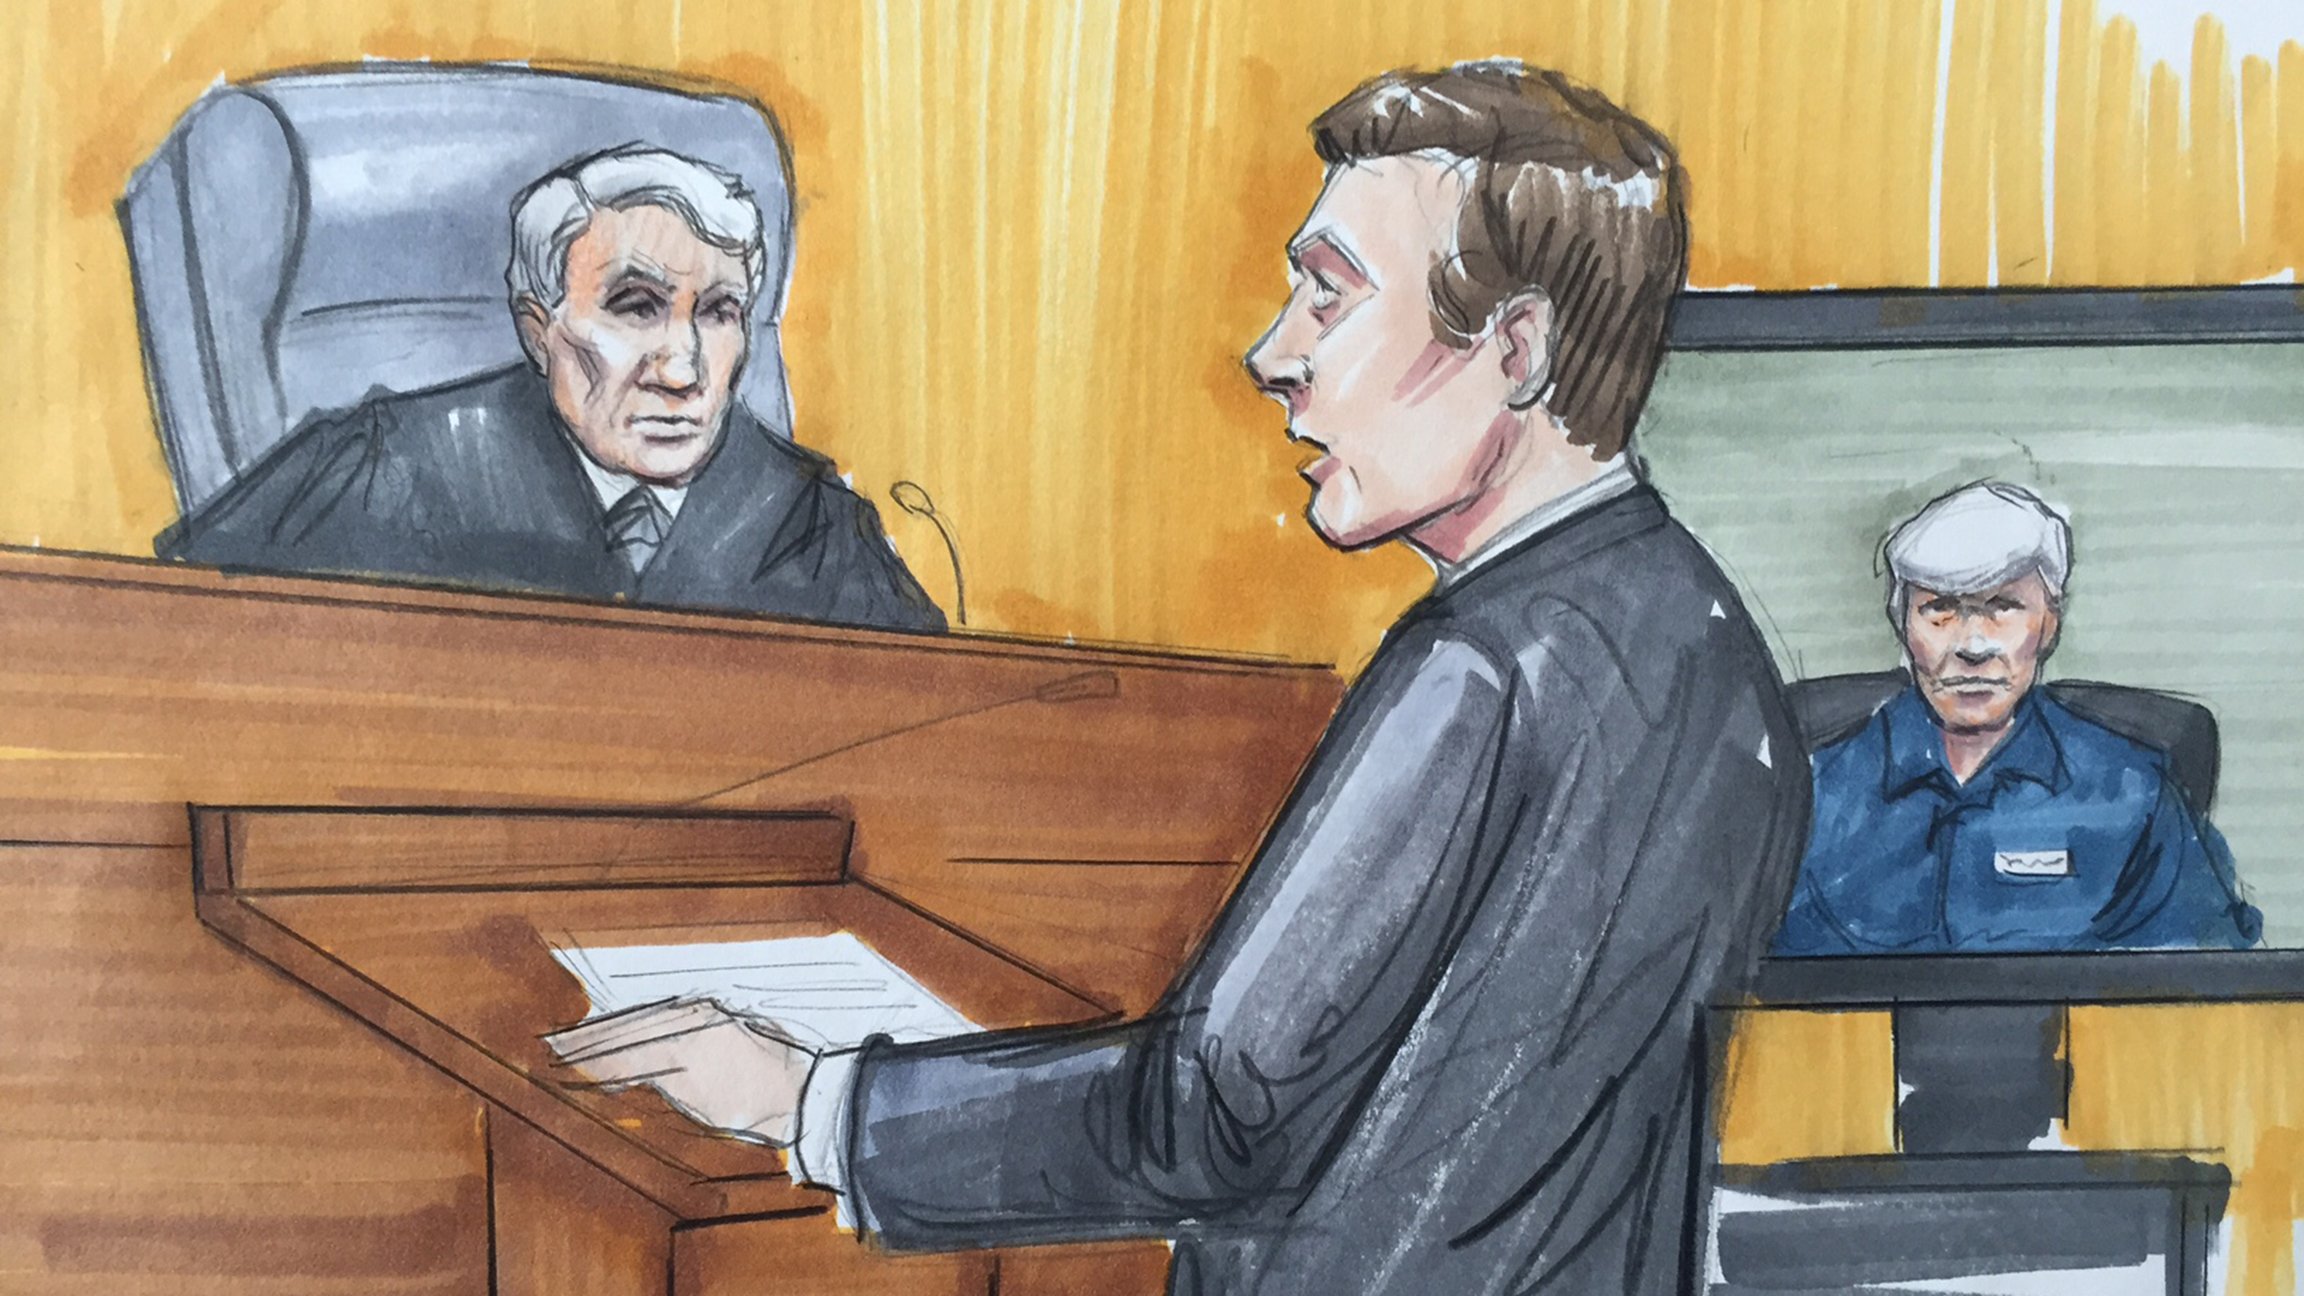 Rod Blagojevich, right, sits during a 2016 appellate court hearing. (Courtroom art by Thomas Gianni)